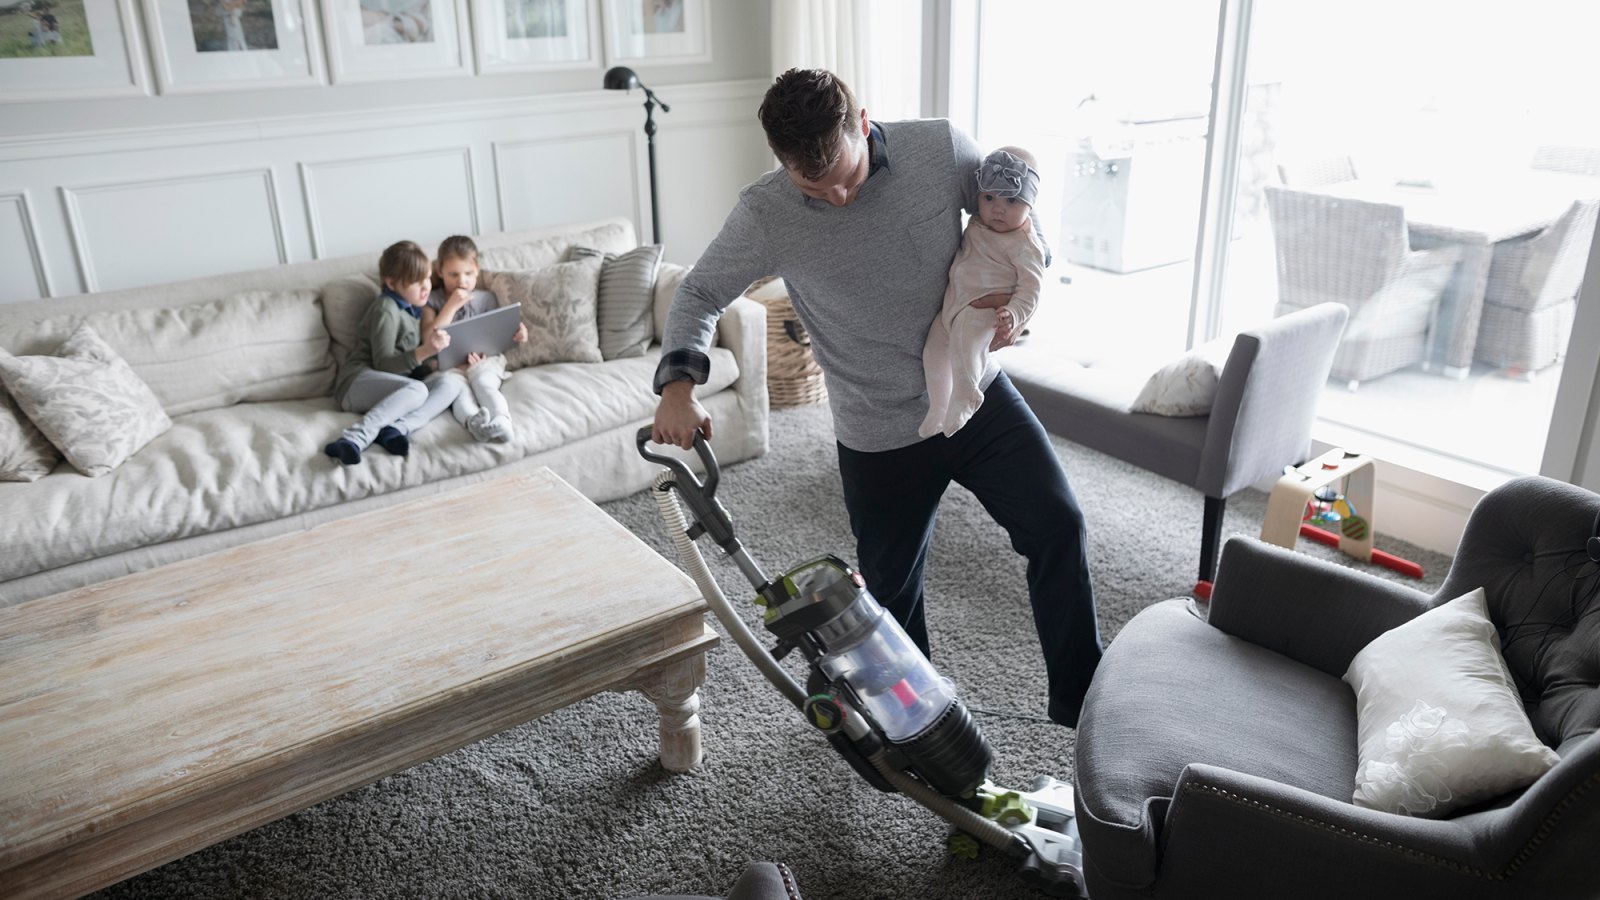 Father holding baby daughter and vacuuming living room